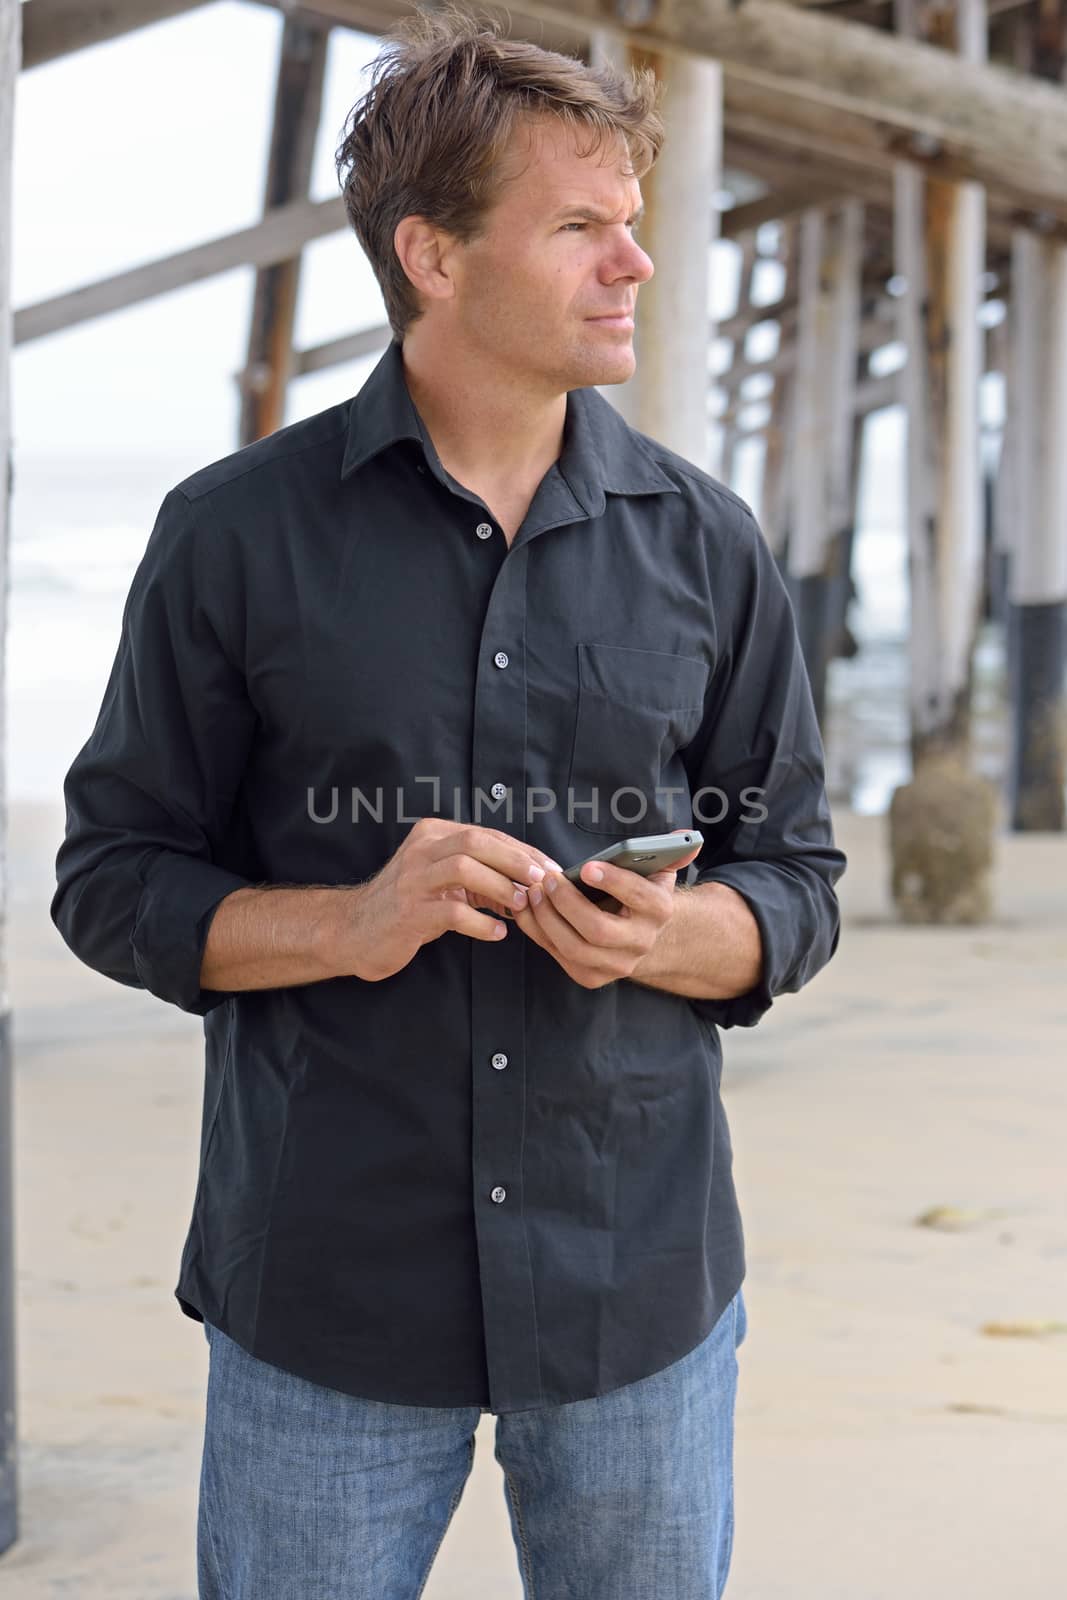 Handsome Caucasian man in casual clothing standing under pier at beach using smart phone as he waits to meet someone